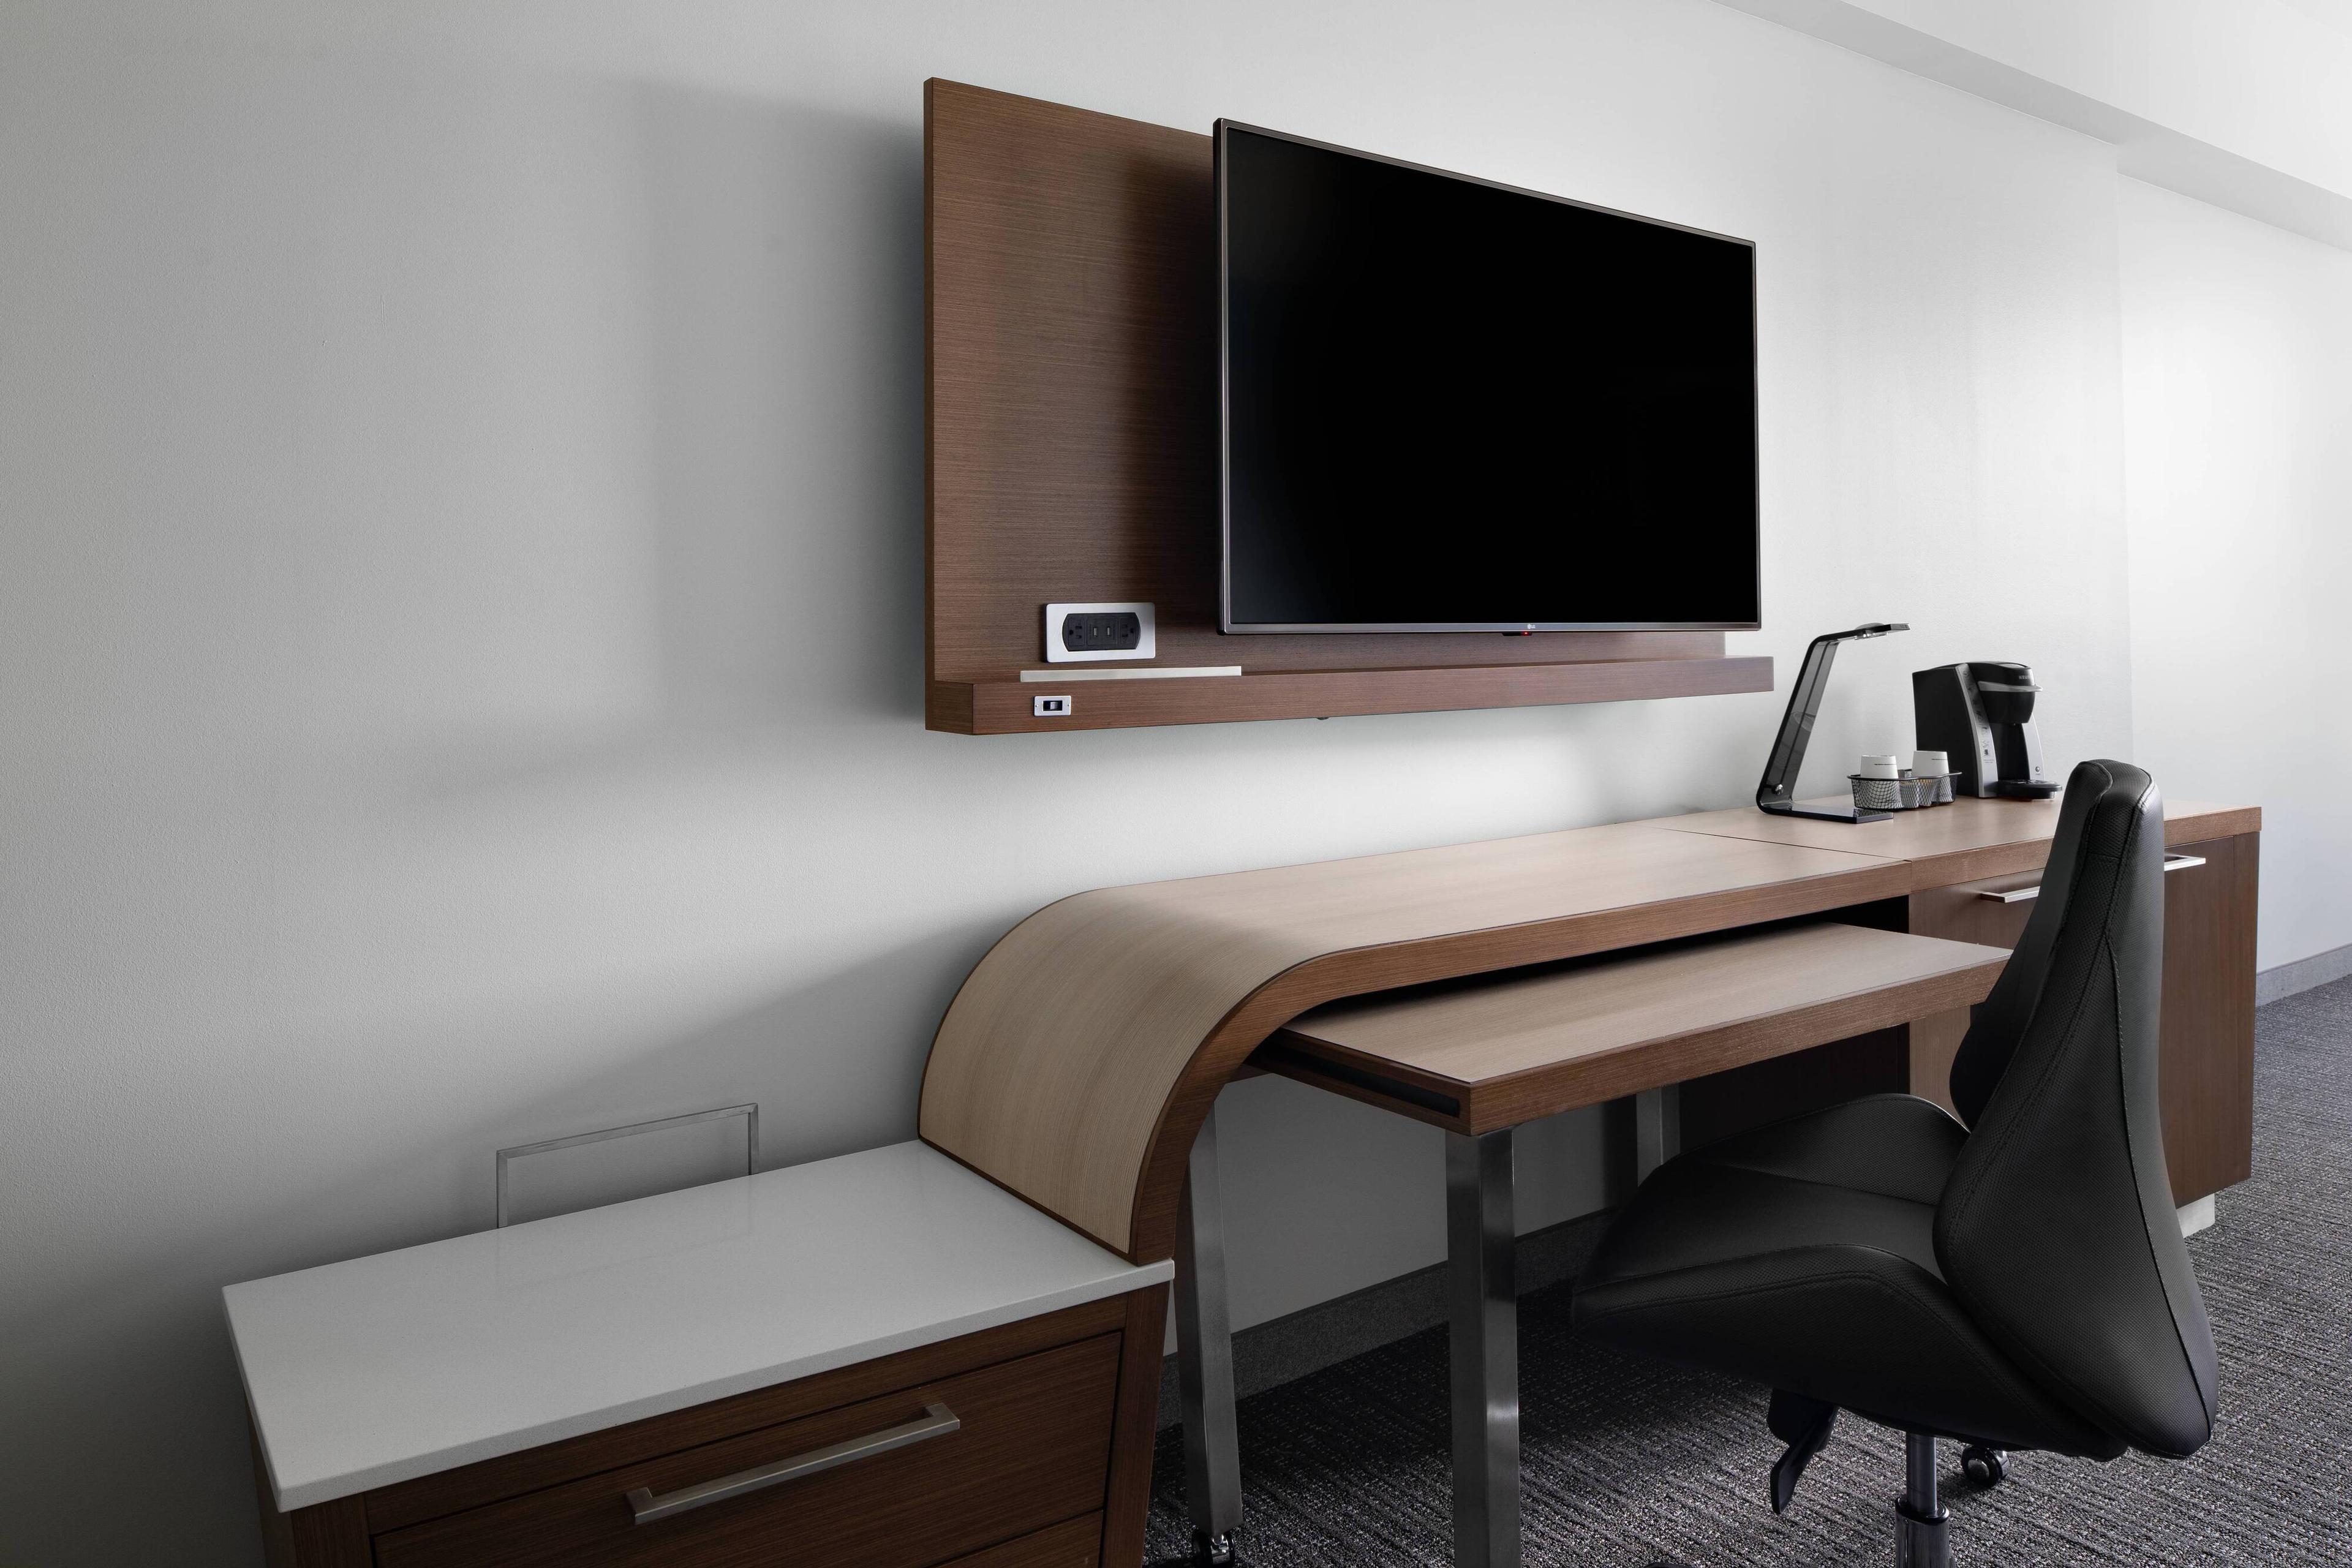 All of our rooms feature a 55 HDTV, works station with rolling desk, and Keurig coffee station, all the amenities to make you feel at home.